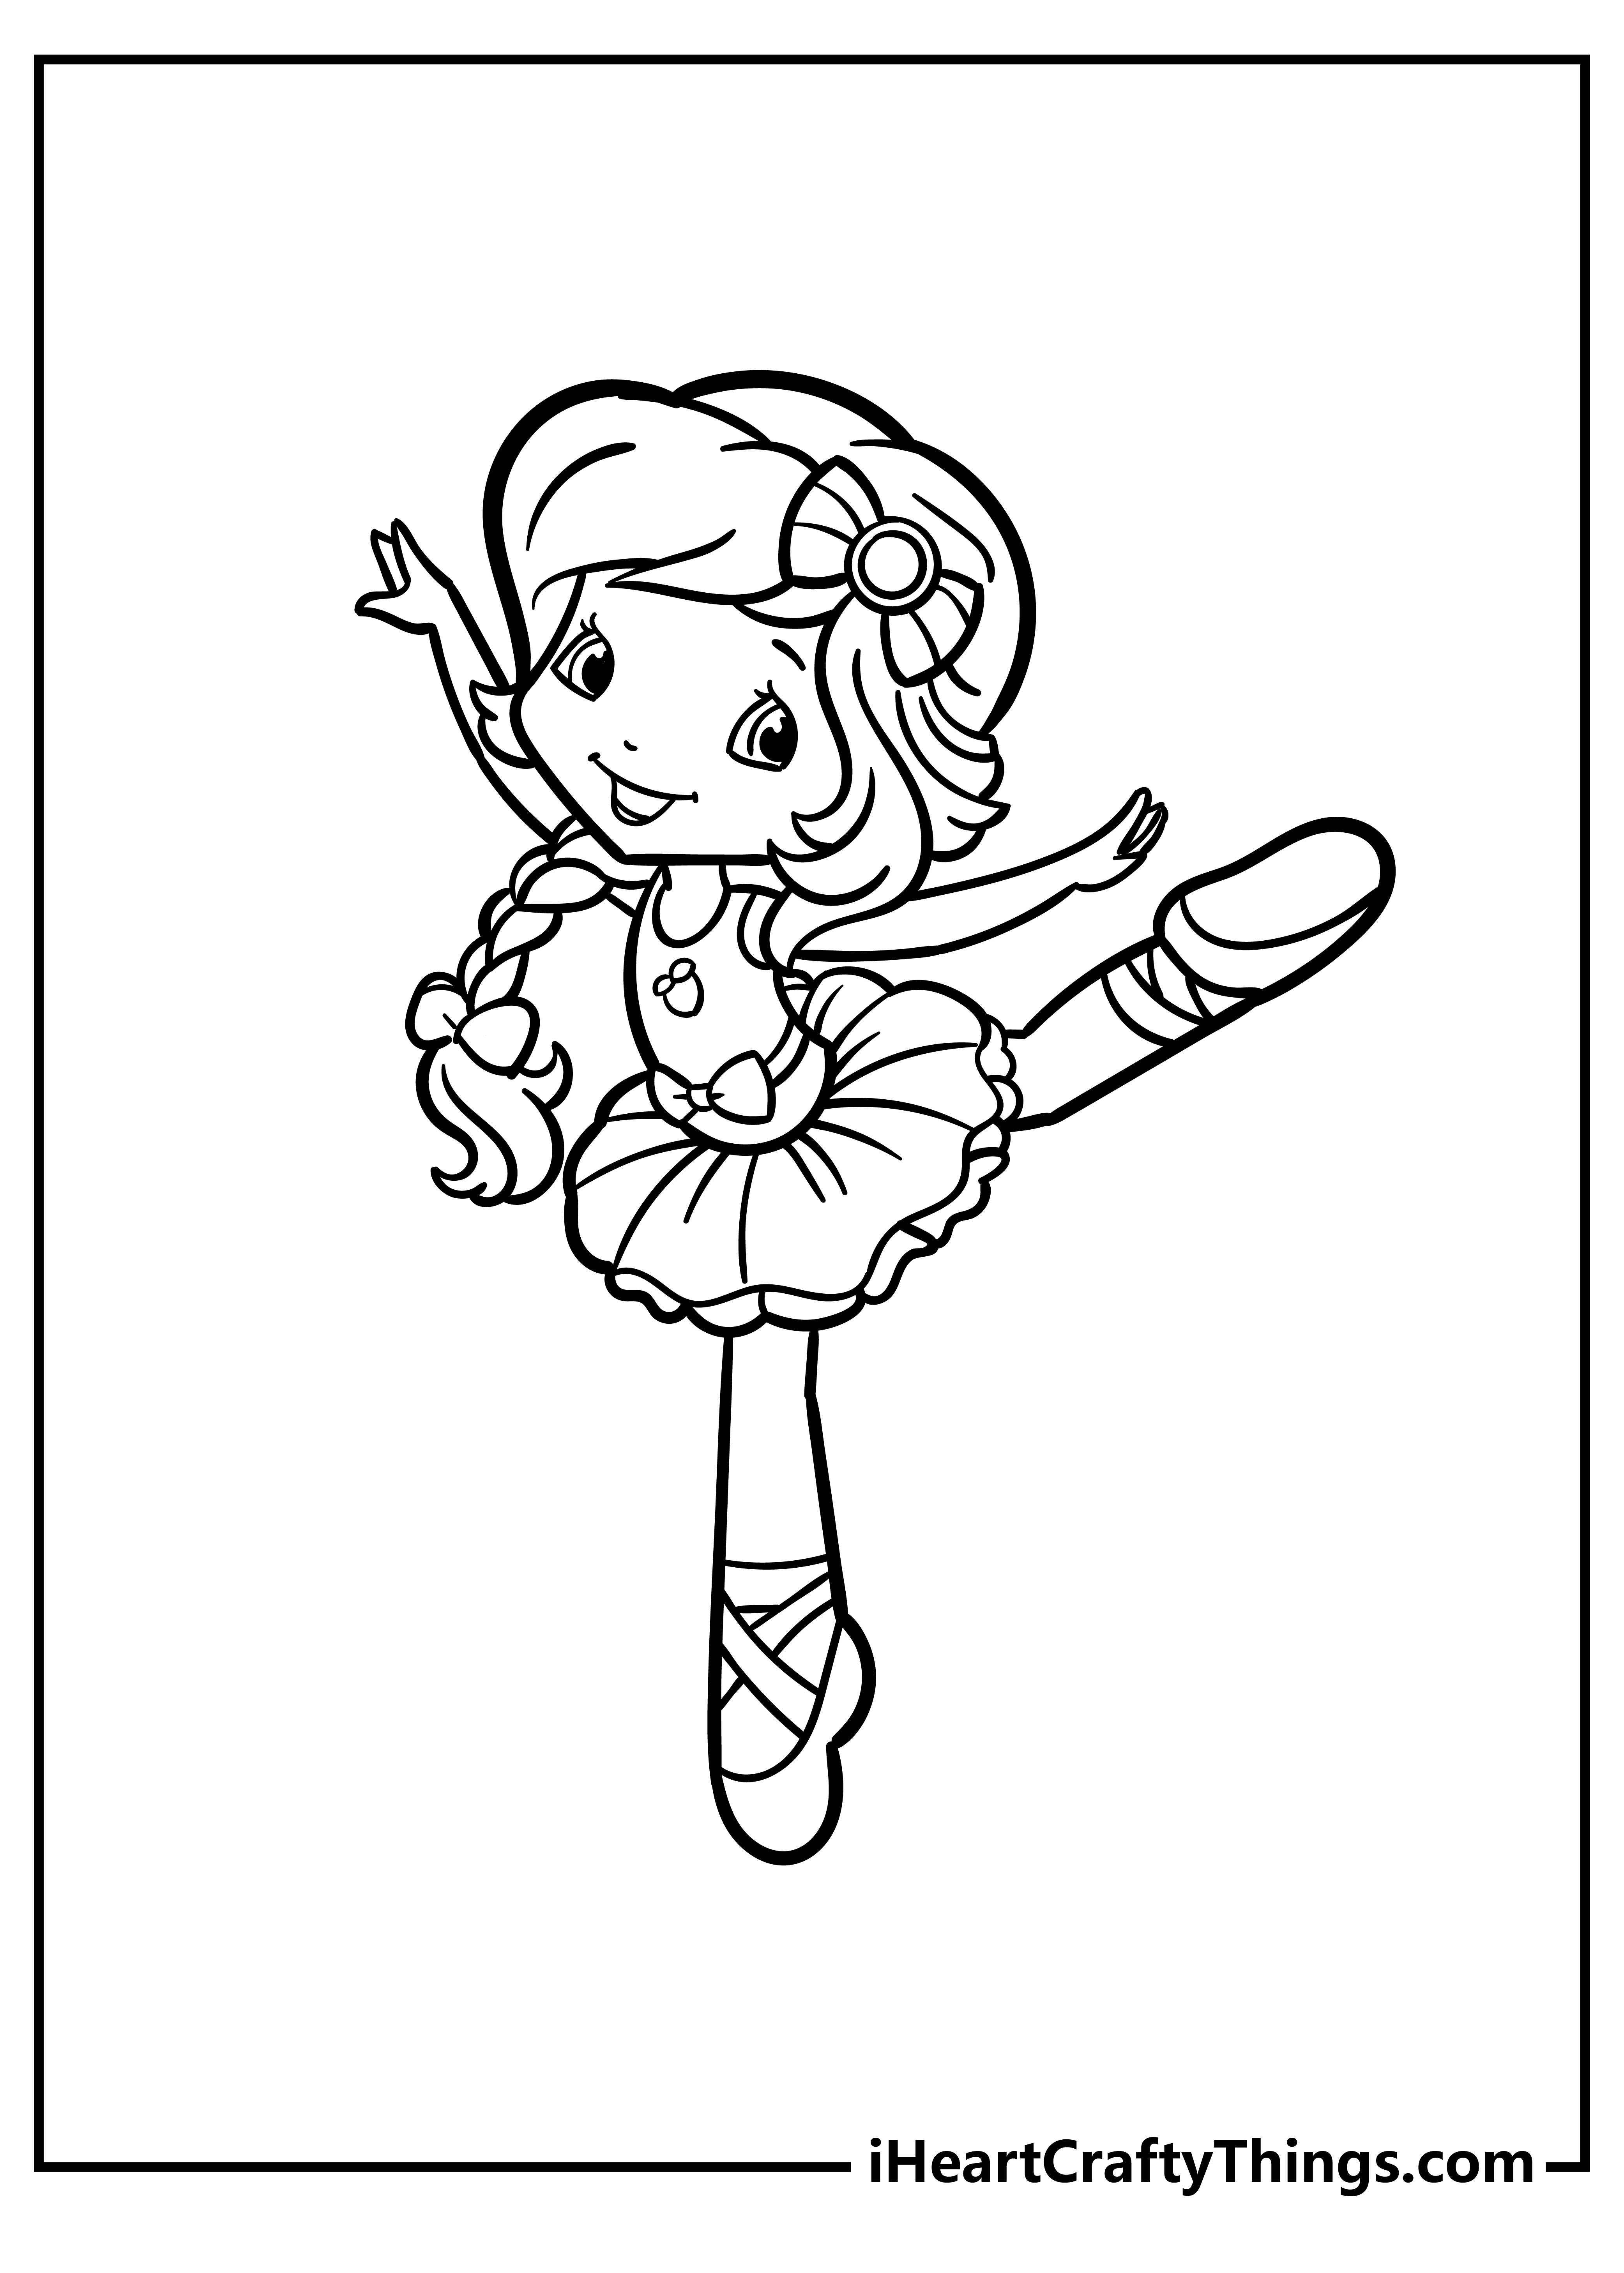 Strawberry Shortcake Coloring Book for kids free printable